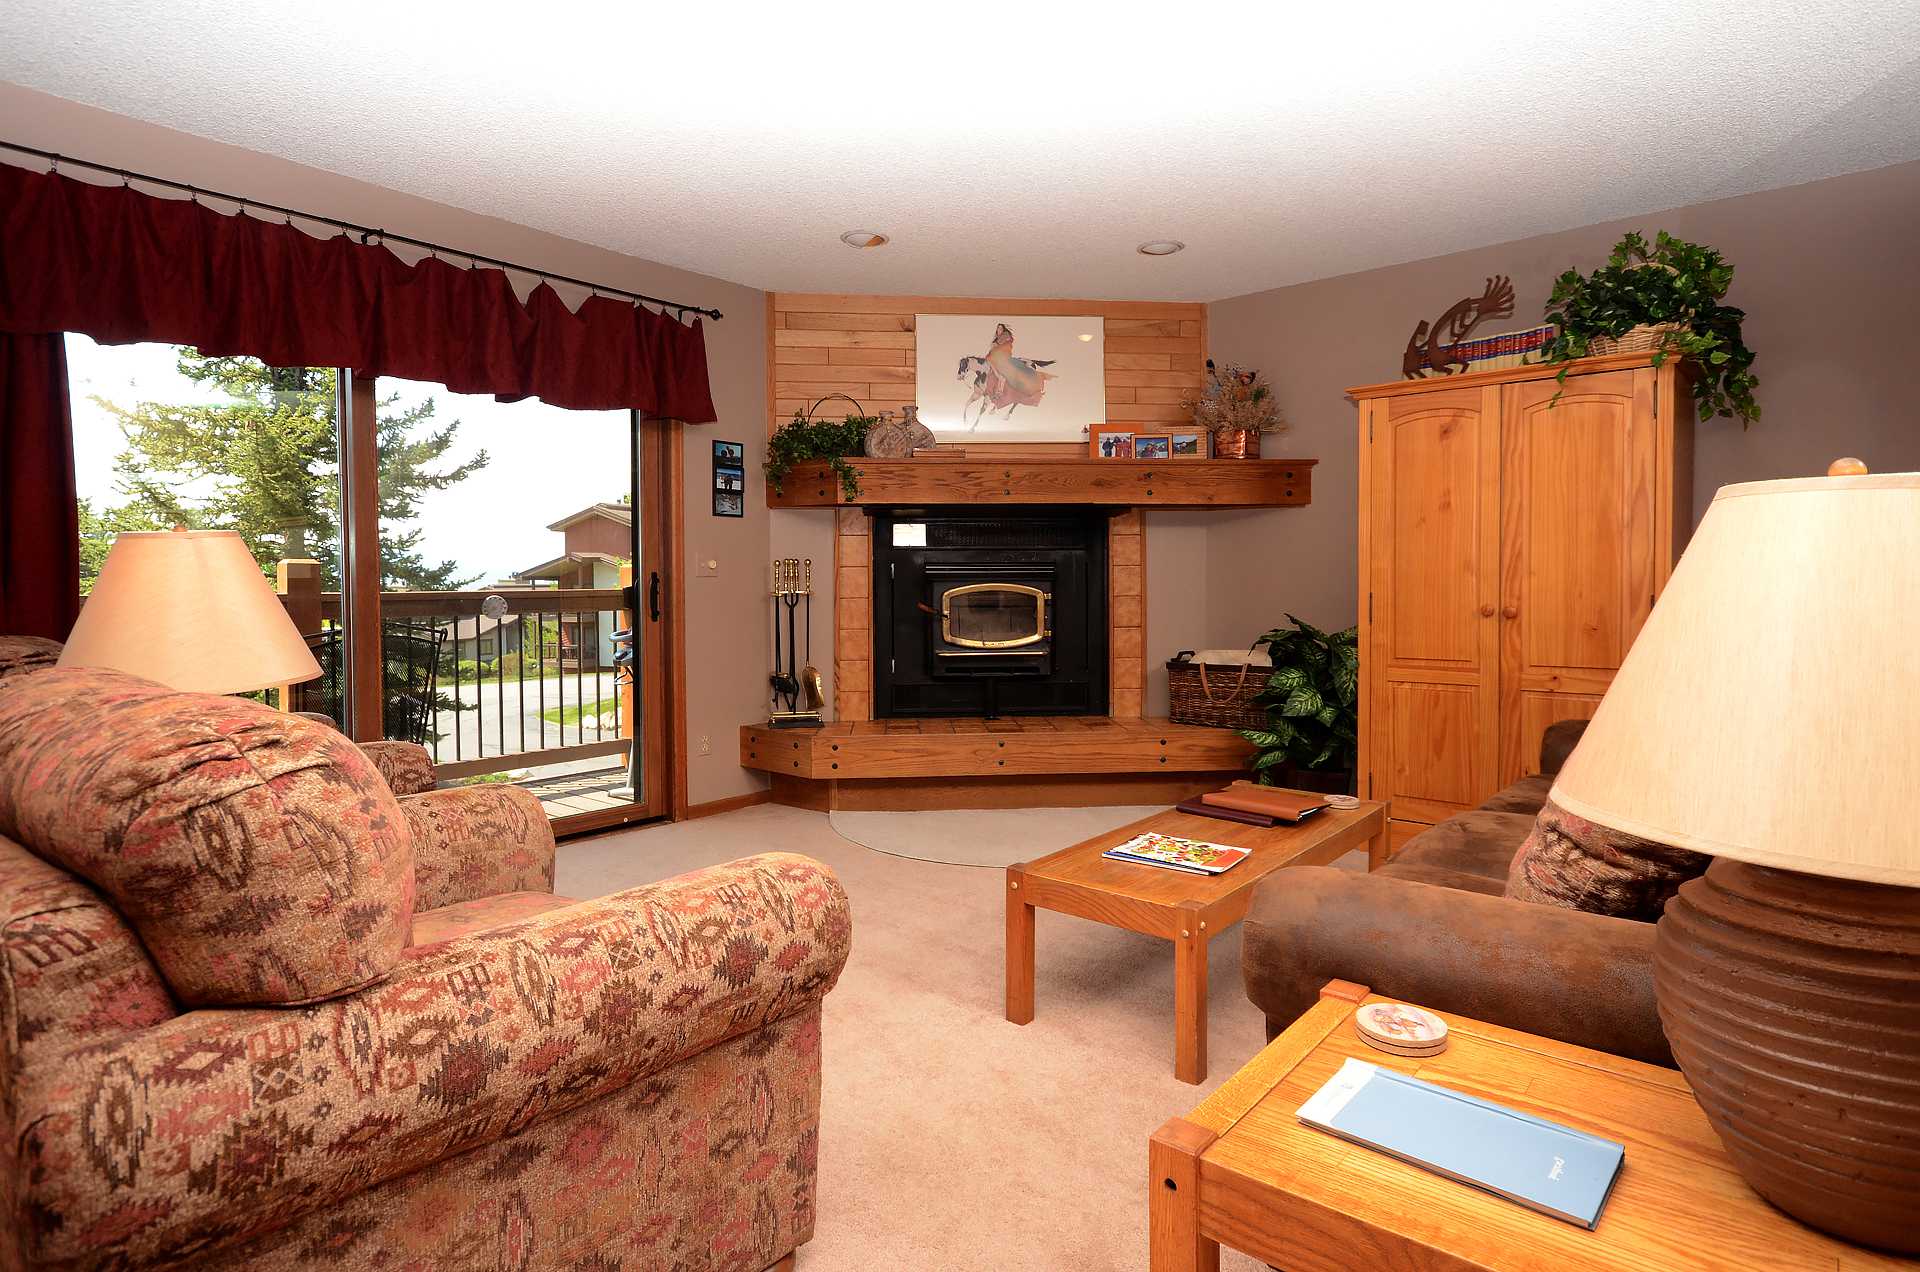 RA103 by Mountain Resorts: Pool, Hot Tub, Grill & fitness Room * Great Views!